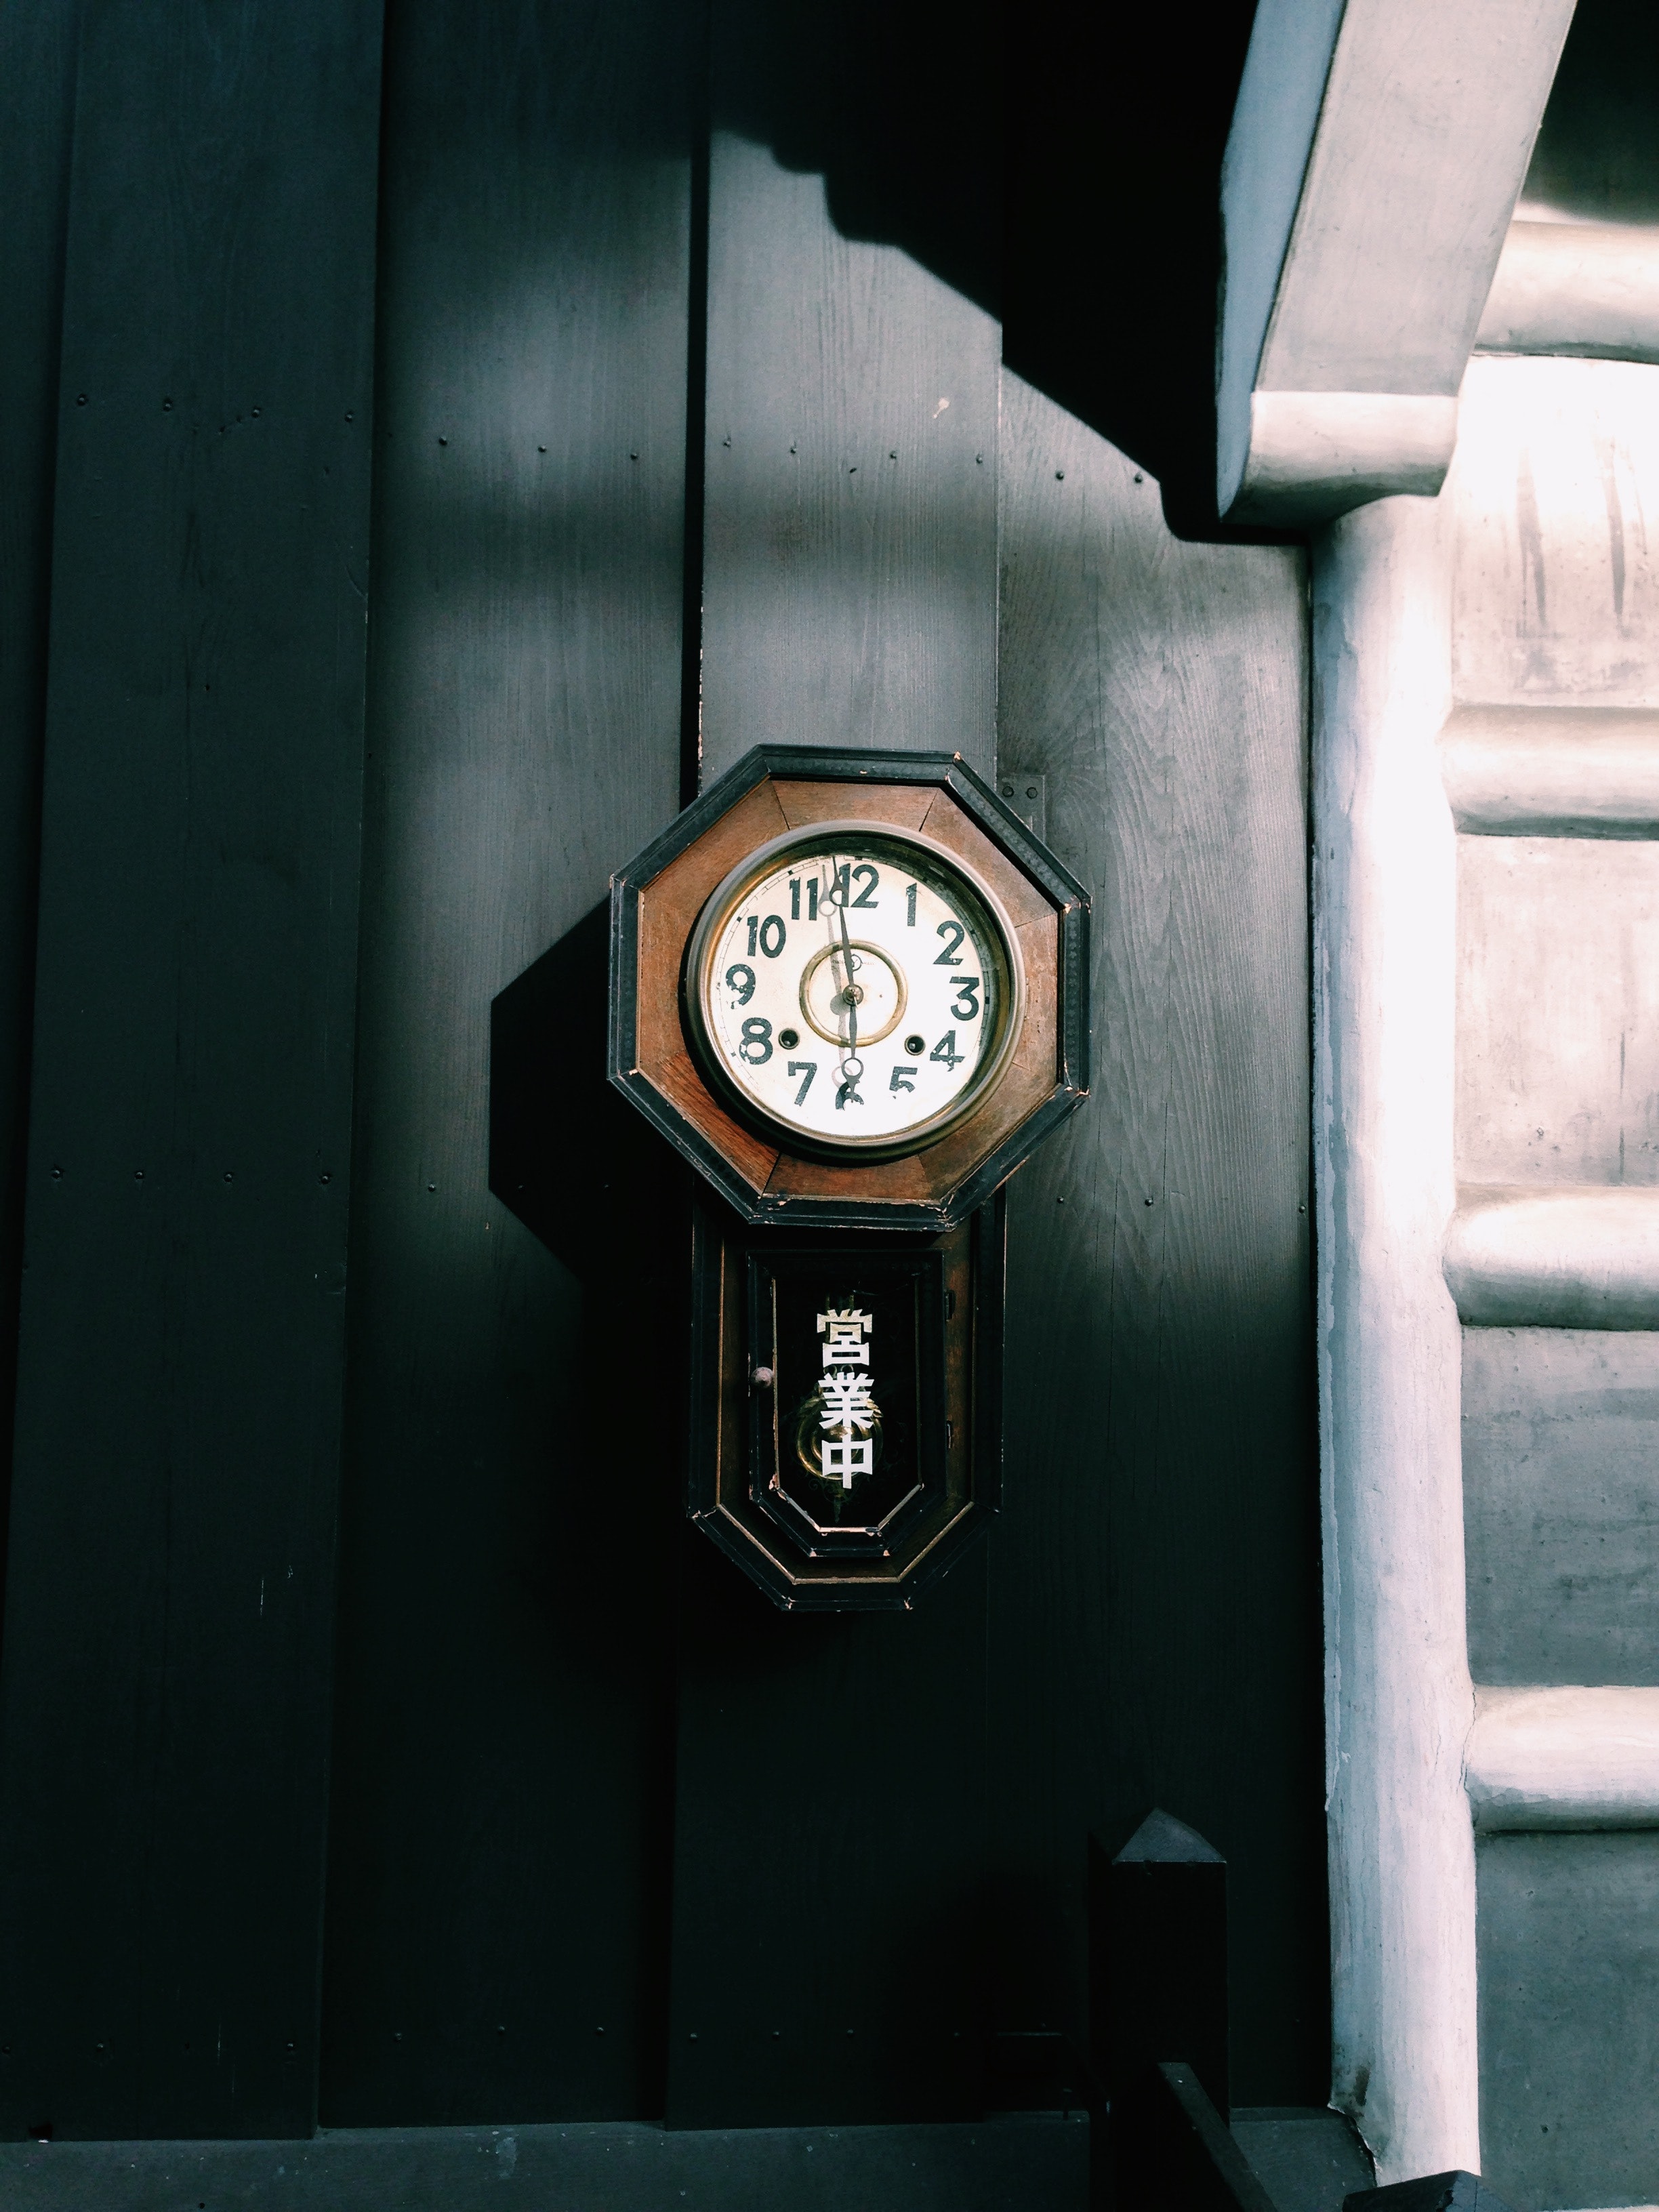 A photo of an antique analog wall clock